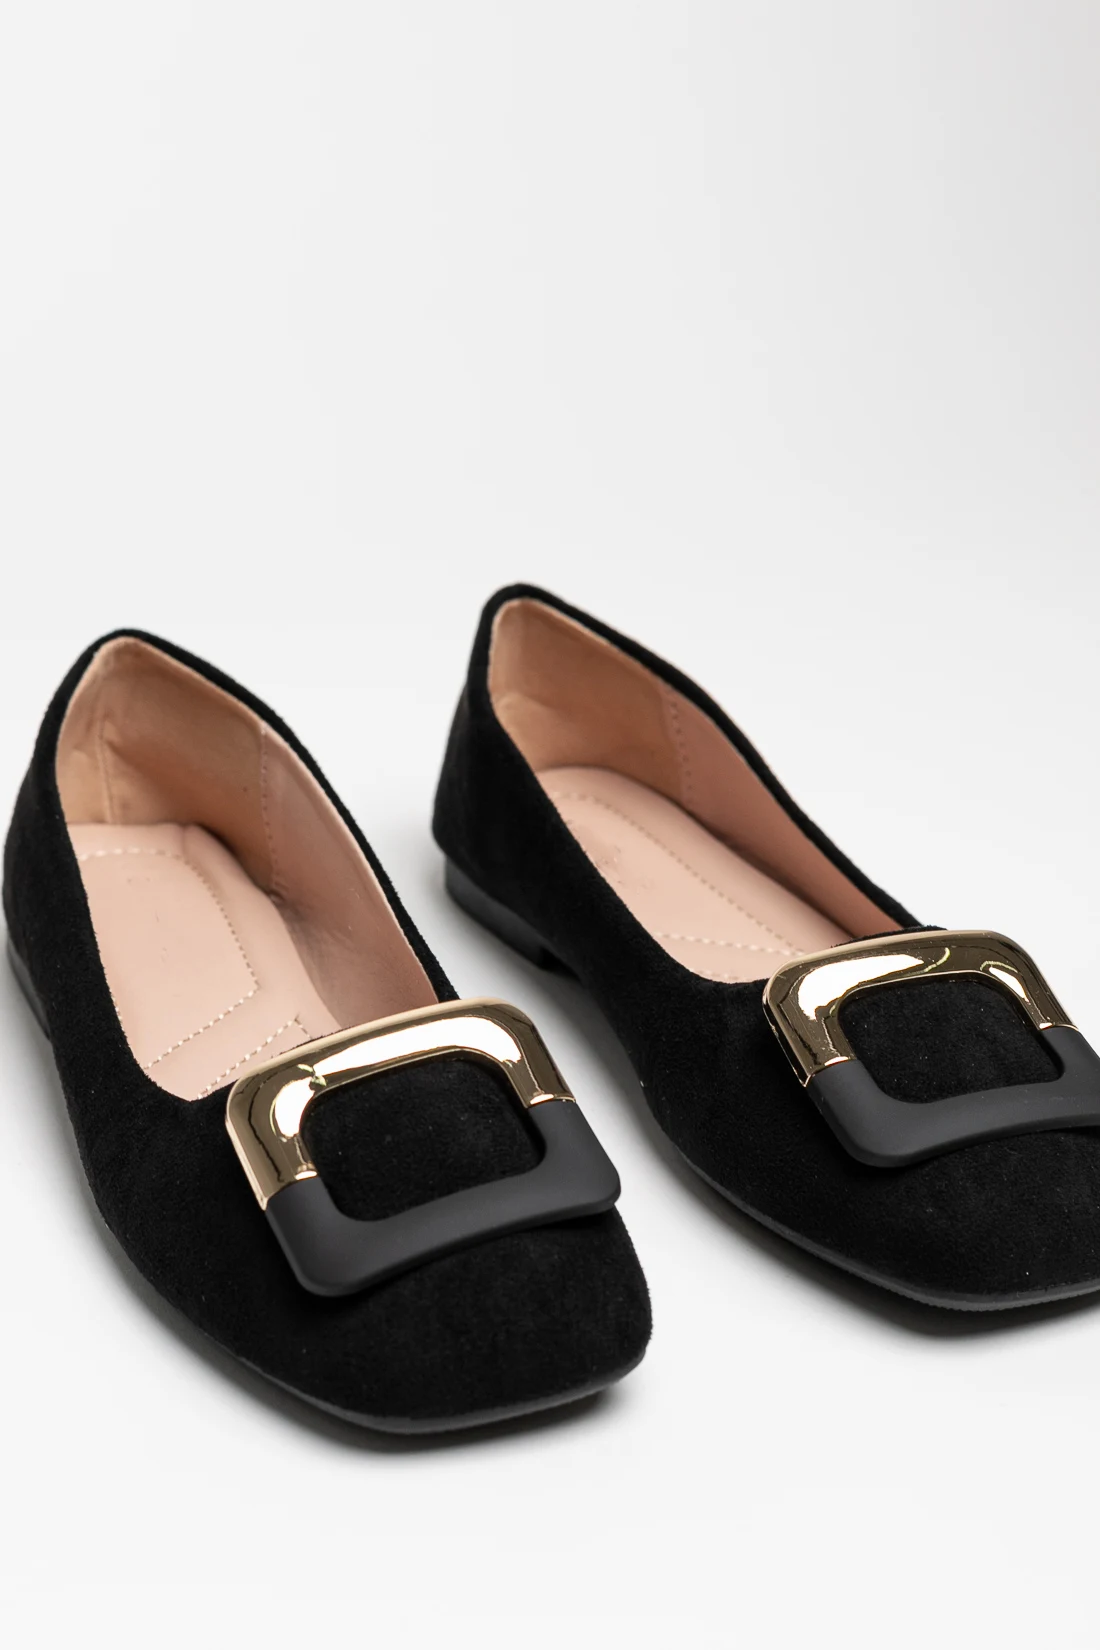 AMELY FLAT SHOES - BLACK